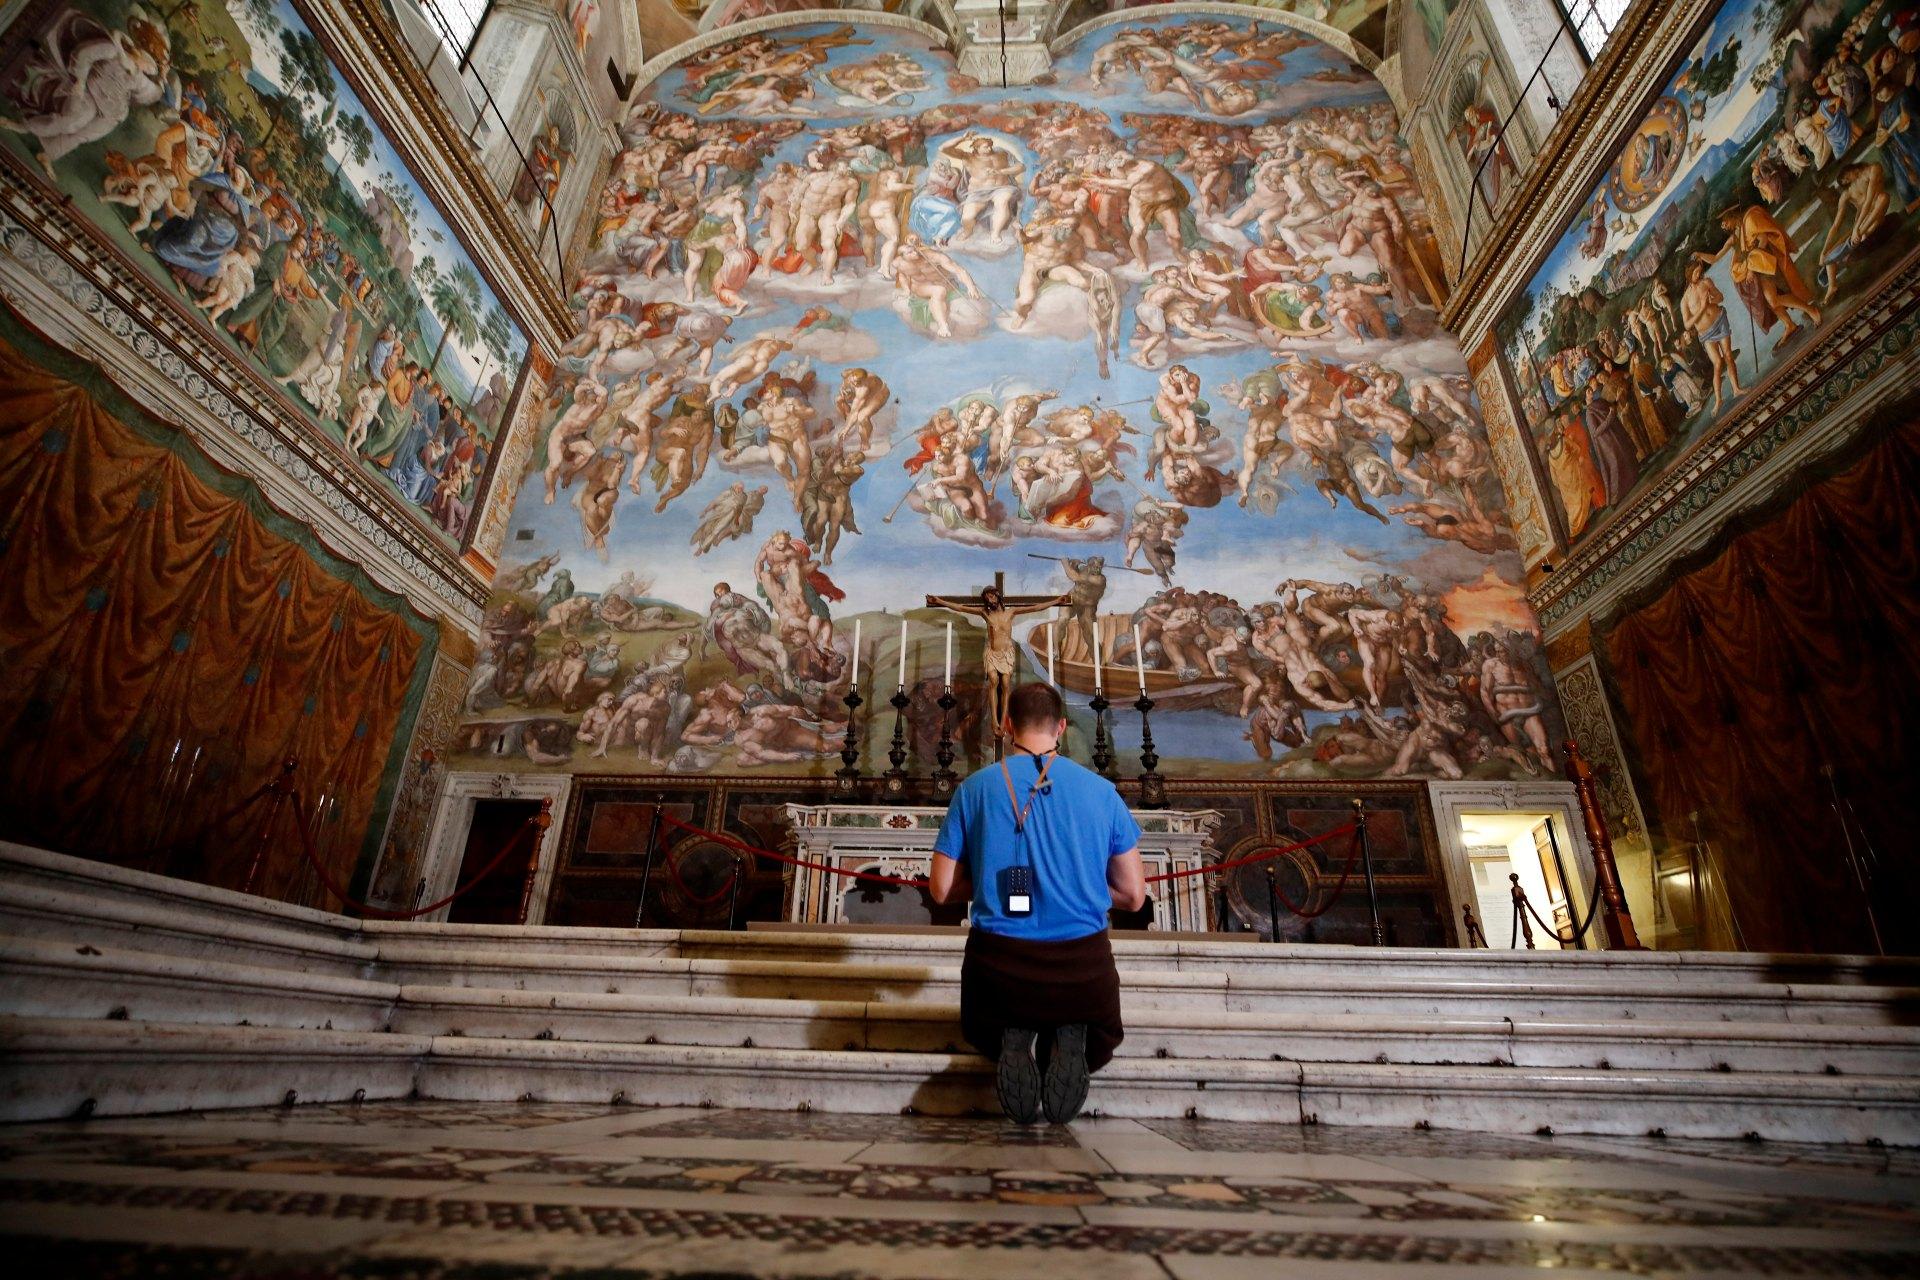 A visitor kneels in front of the Last Judgement fresco by the Italian Renaissance painter Michelangelo inside the Sistine Chapel of the Vatican Museums on the occasion of the museum's reopening, in Rome, Monday, May 3, 2021. The Vatican Museums reopened Monday to visitors after a shutdown following COVID-19 containment measures. (AP Photo / Alessandra Tarantino)